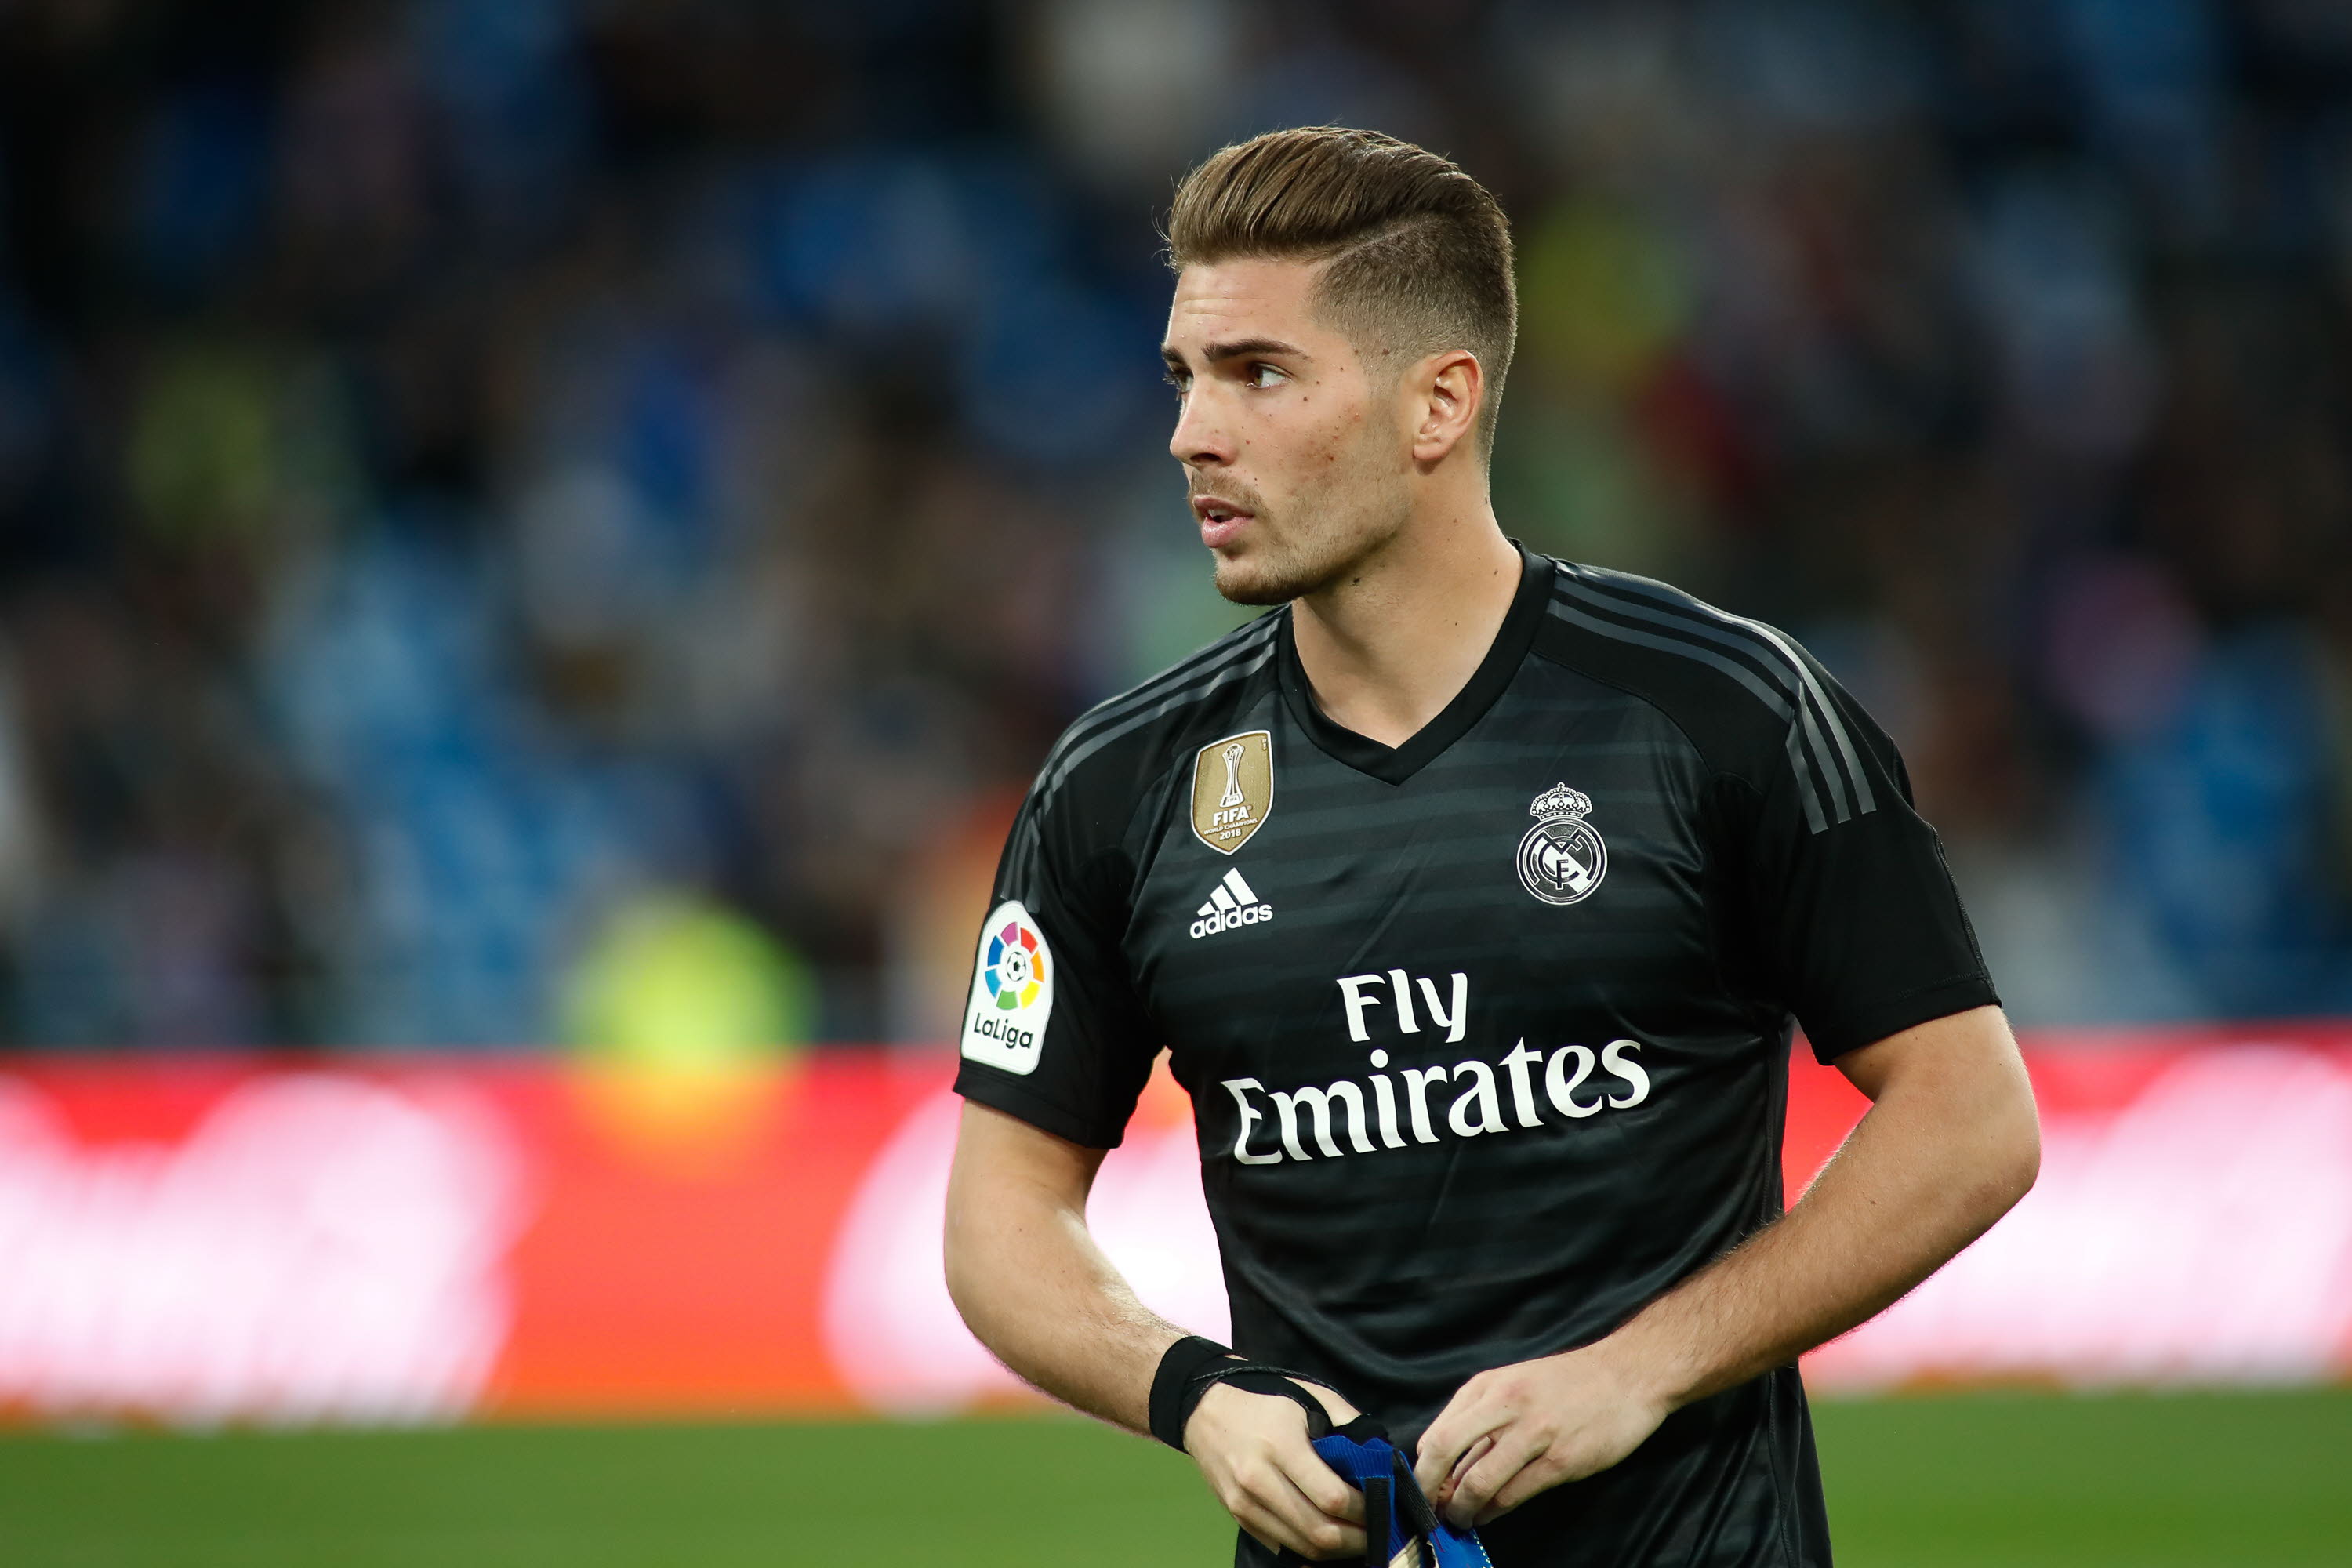 Luca Zidane of Real Madrid during the spanish championship, La Liga, football match played between Real Madrid and SD Huesca at Santiago Bernabeu Stadium in Madrid, Spain, on March 31, 2019.
TFGP.